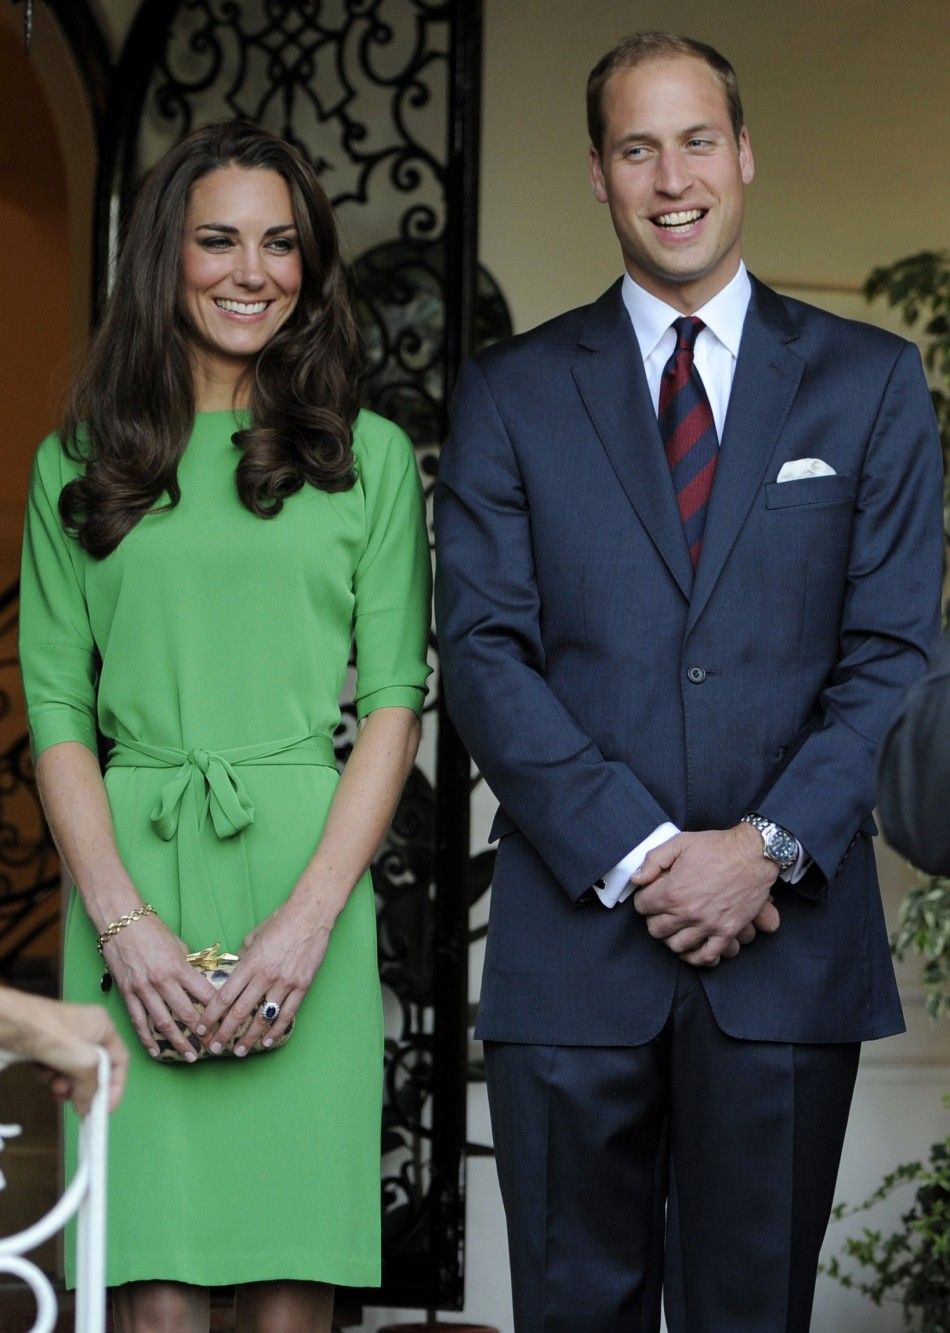 William and Kate attend a private reception in Los Angeles